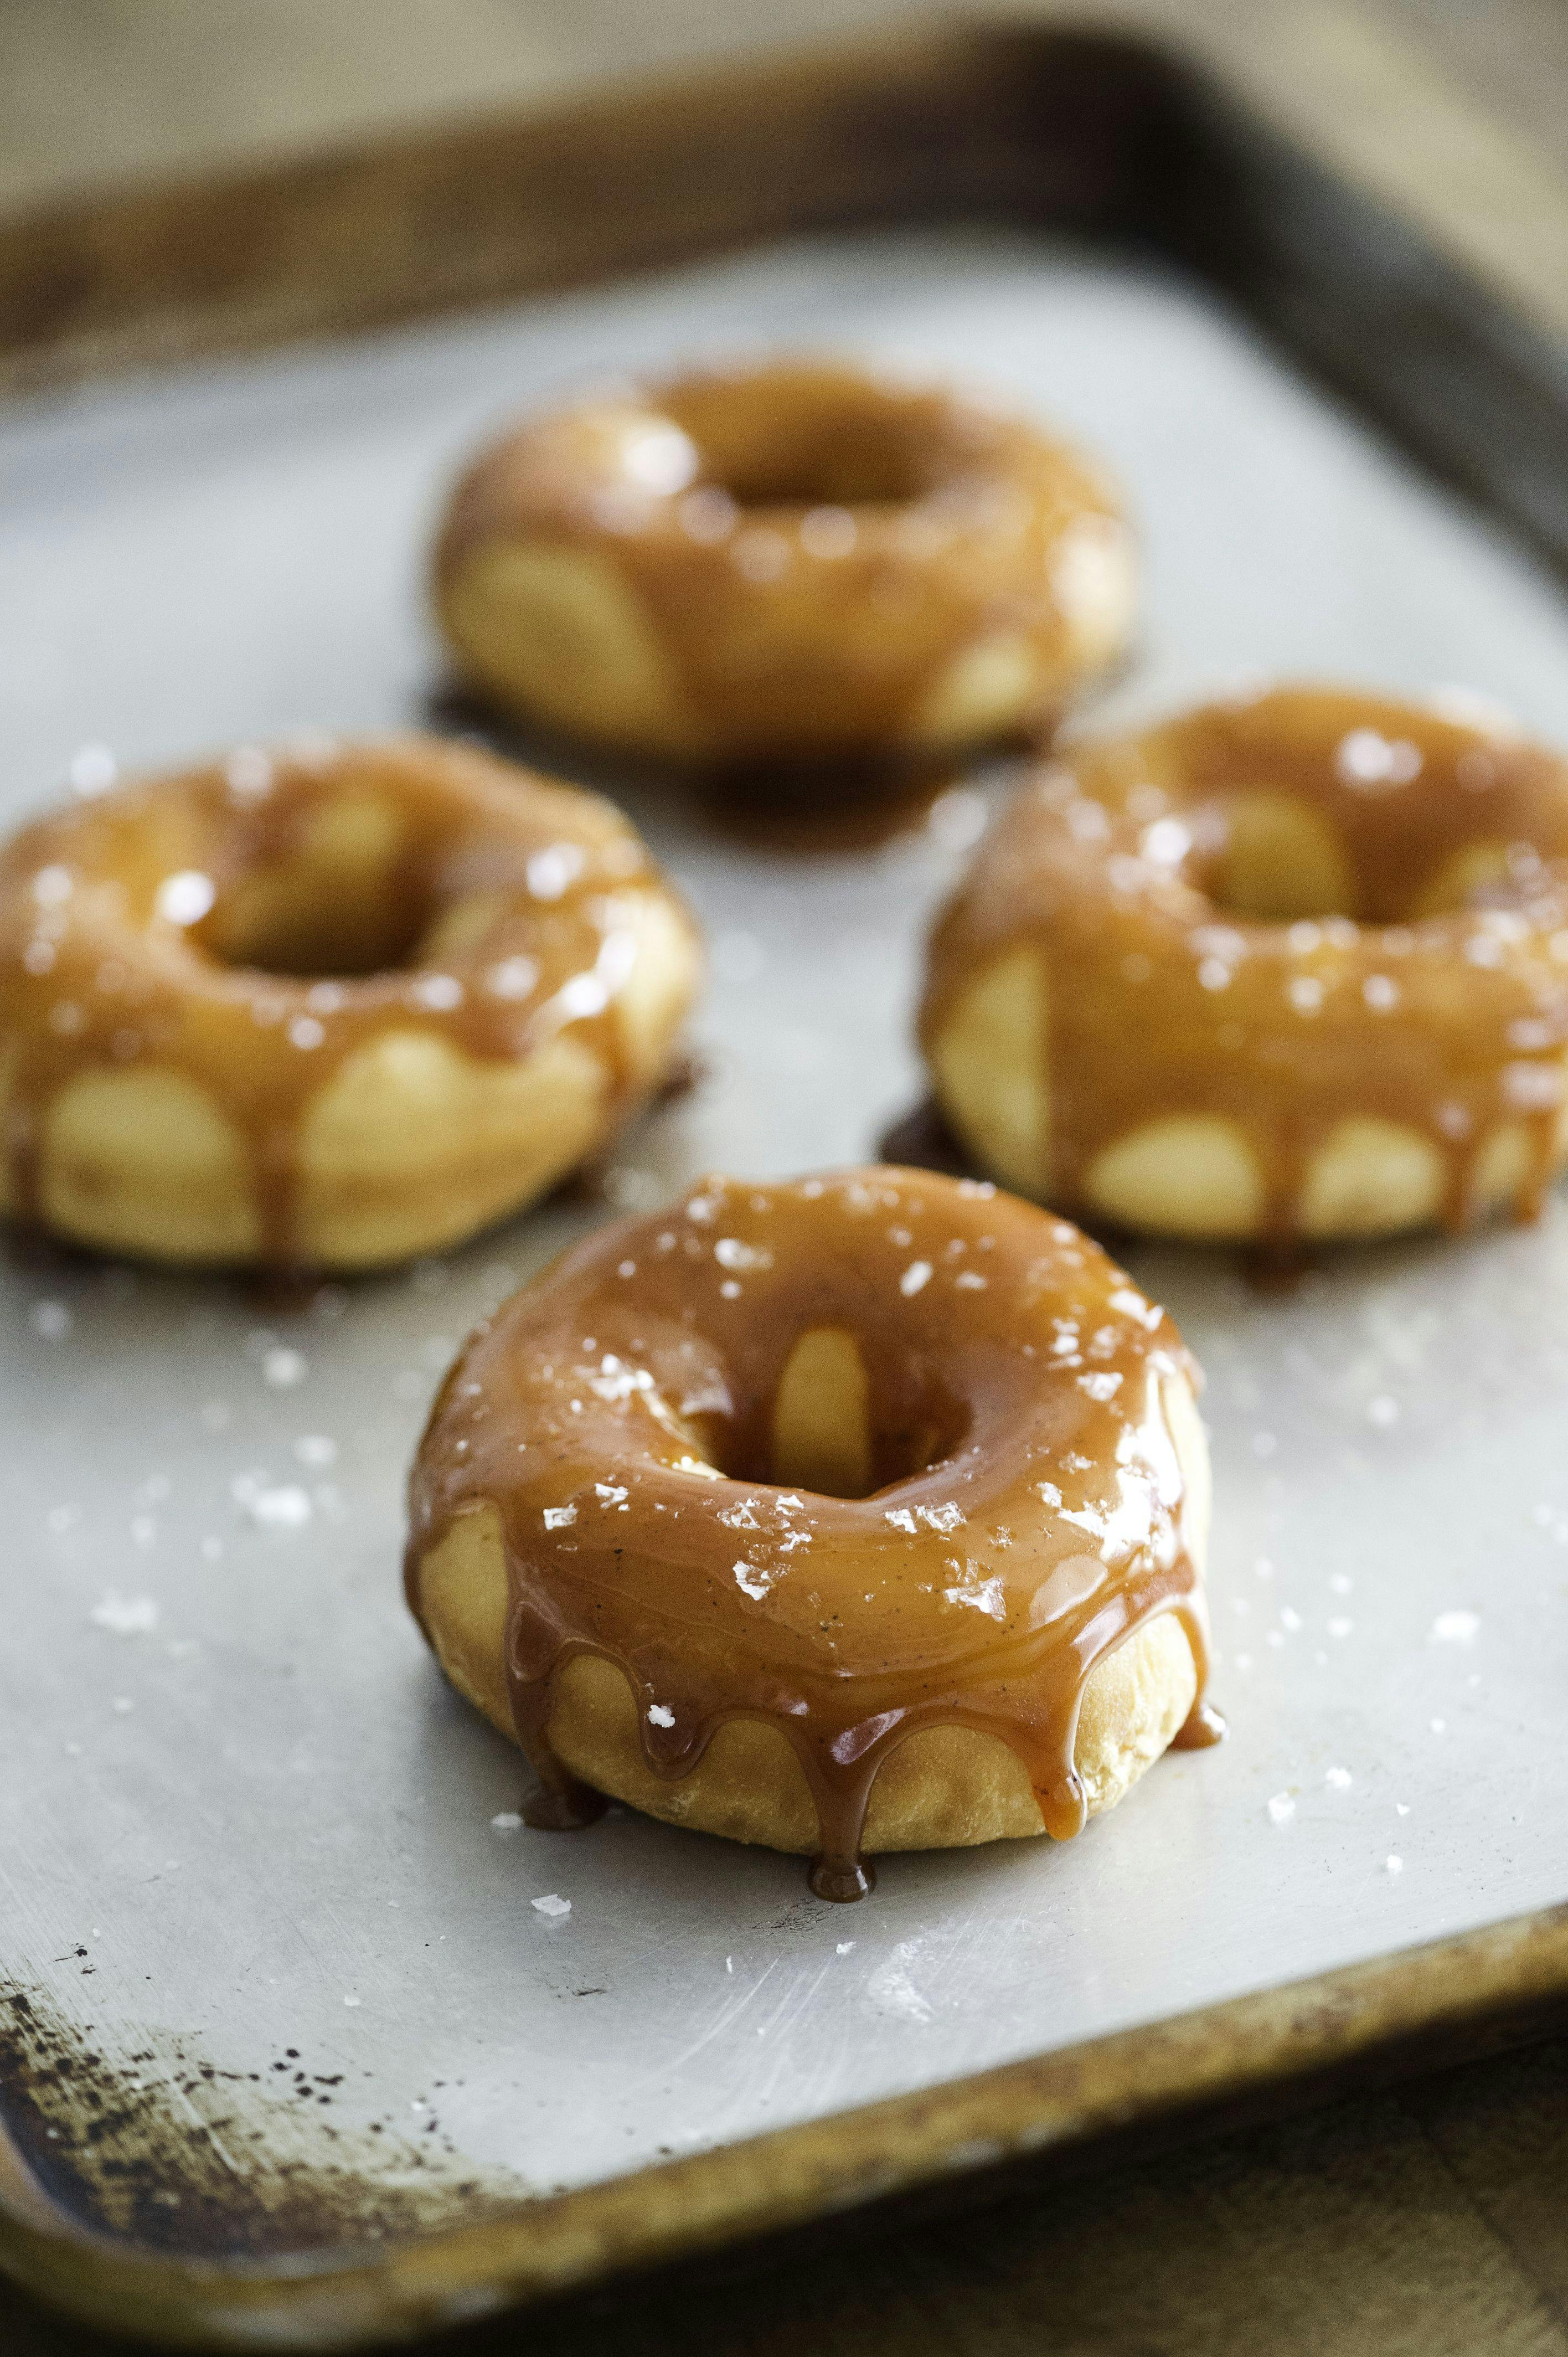 5 Surprising Foods with More Sugar Than a Glazed Donut